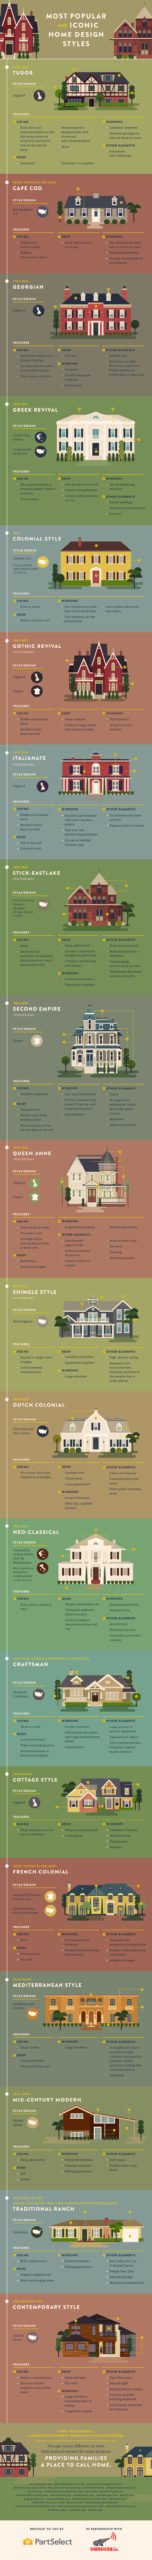 Major Home Design Styles Around The World Explained [Infographic]